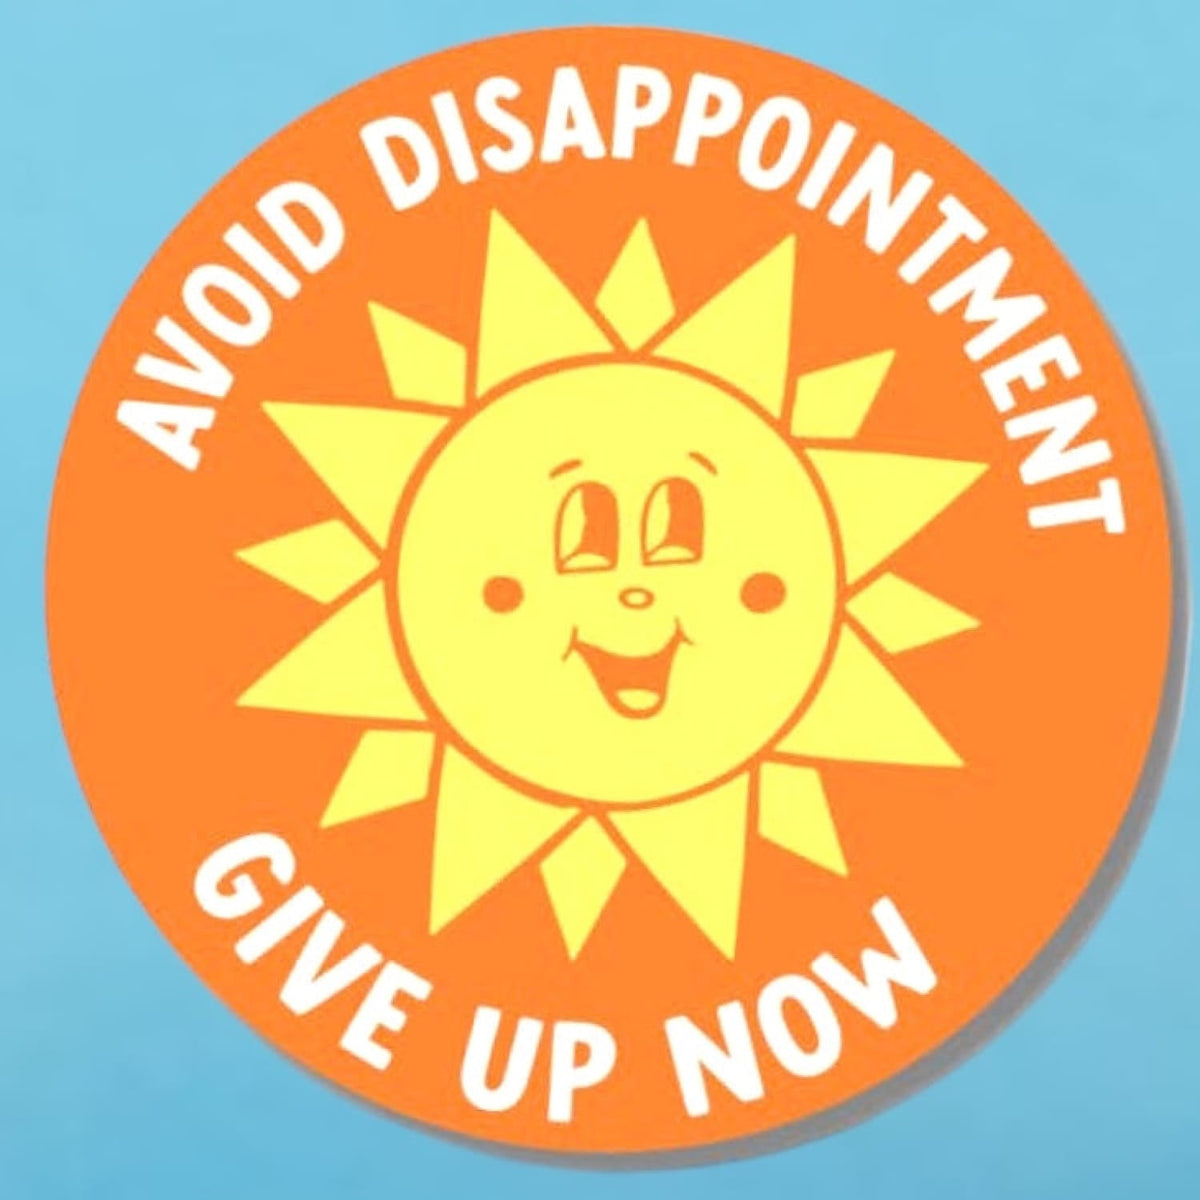 Avoid Disappointment Sticker Decorative Sticker - Made In